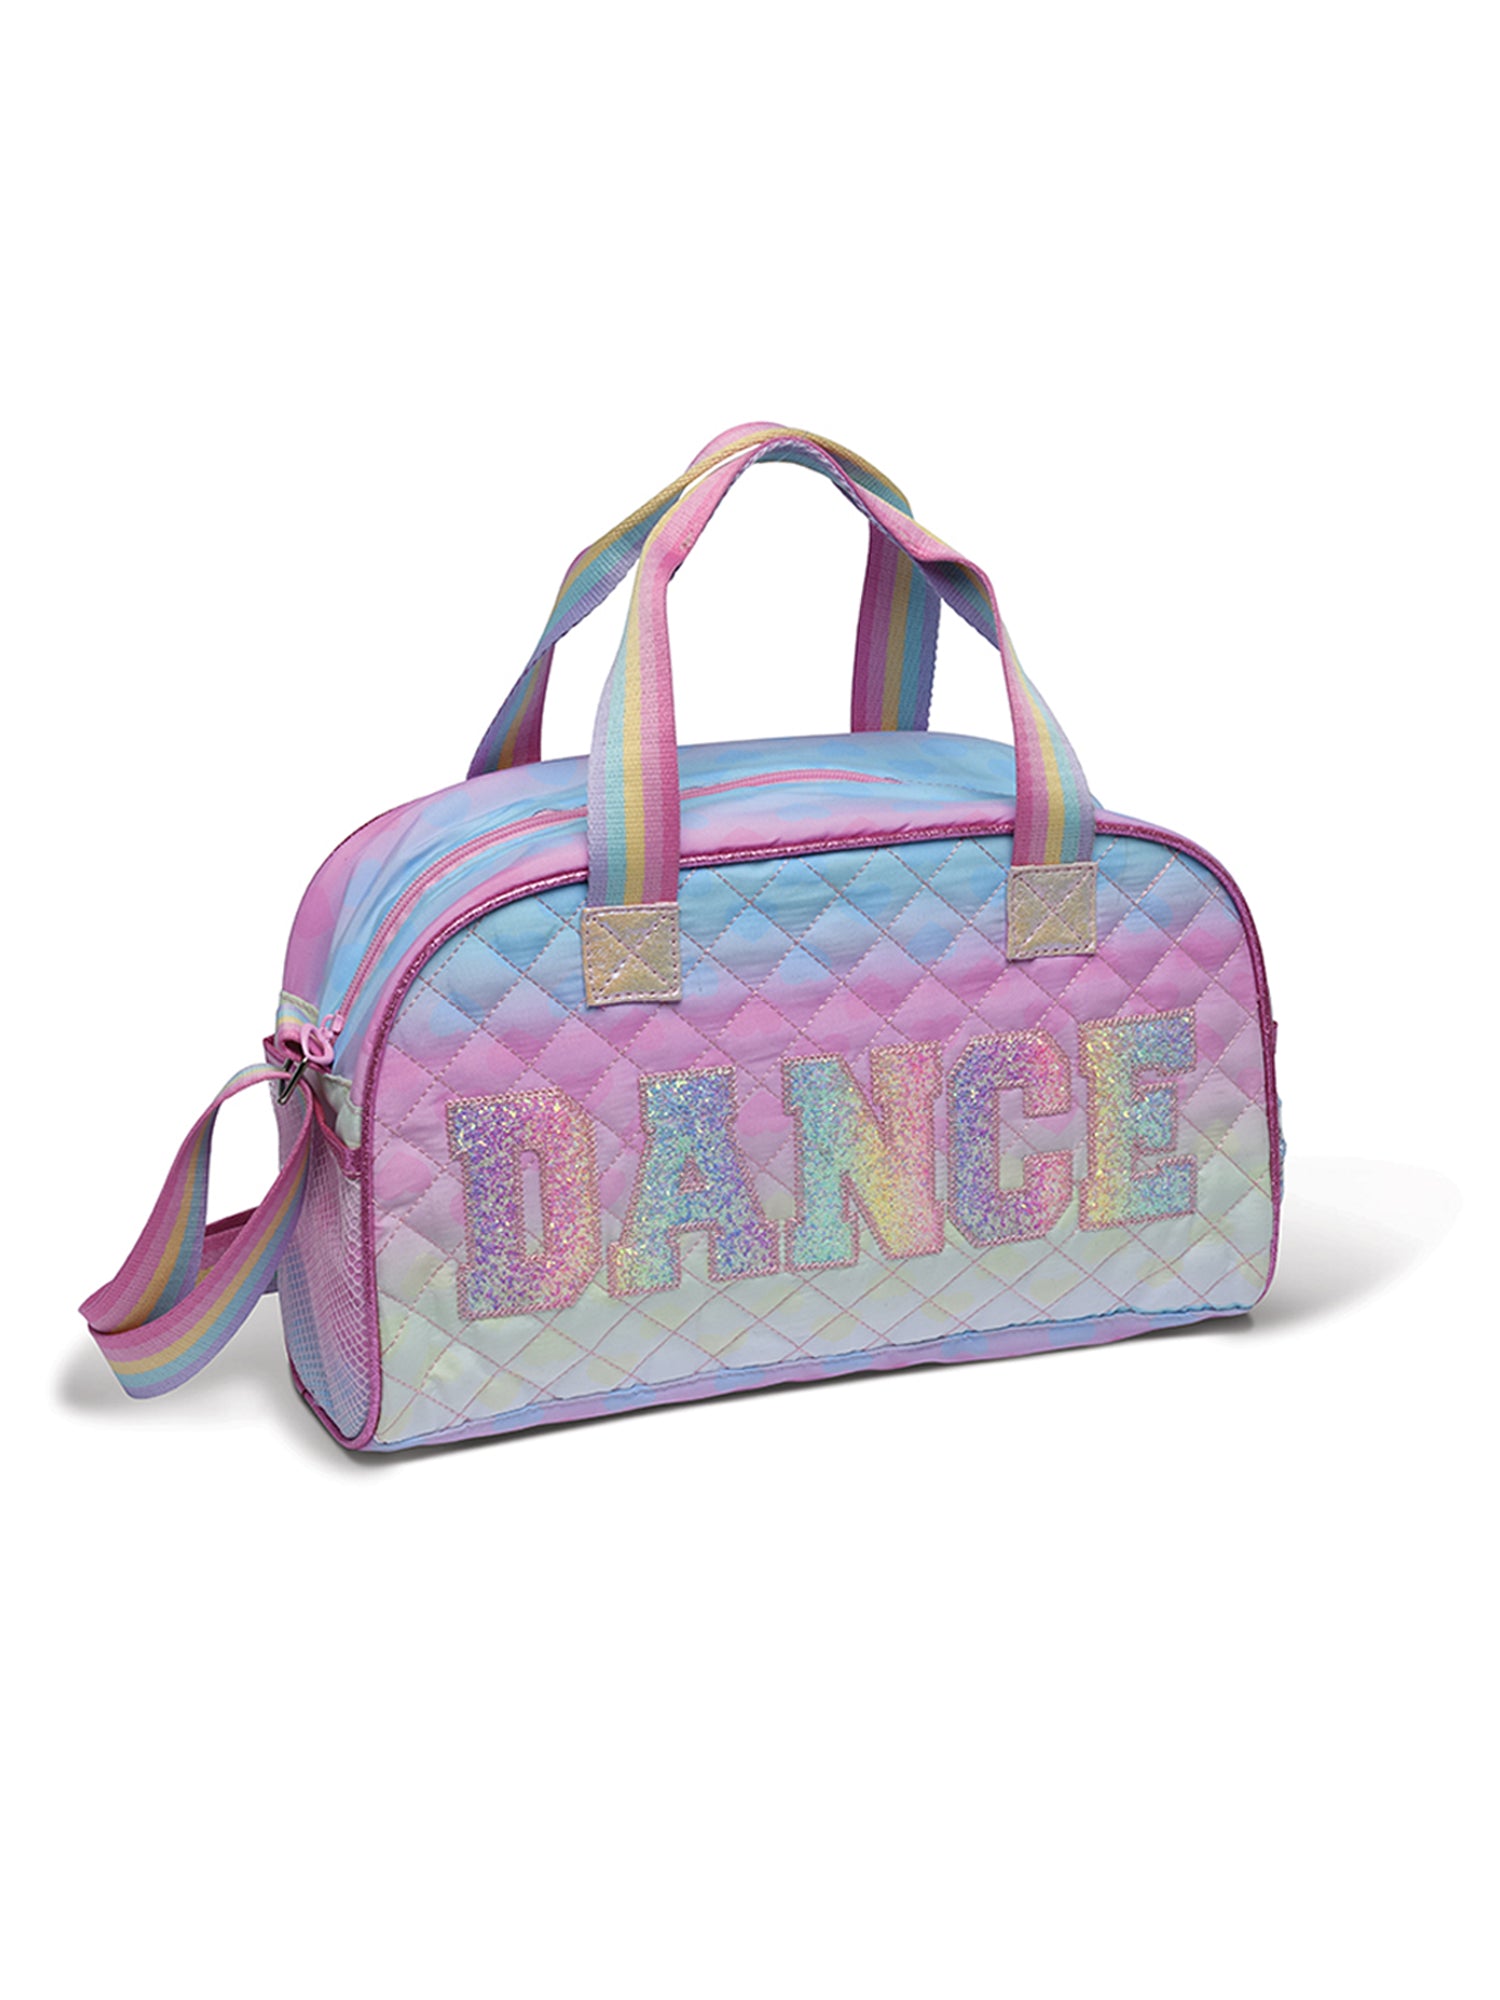 MT WORLD Toddler Dance Bag for Girls Personalized